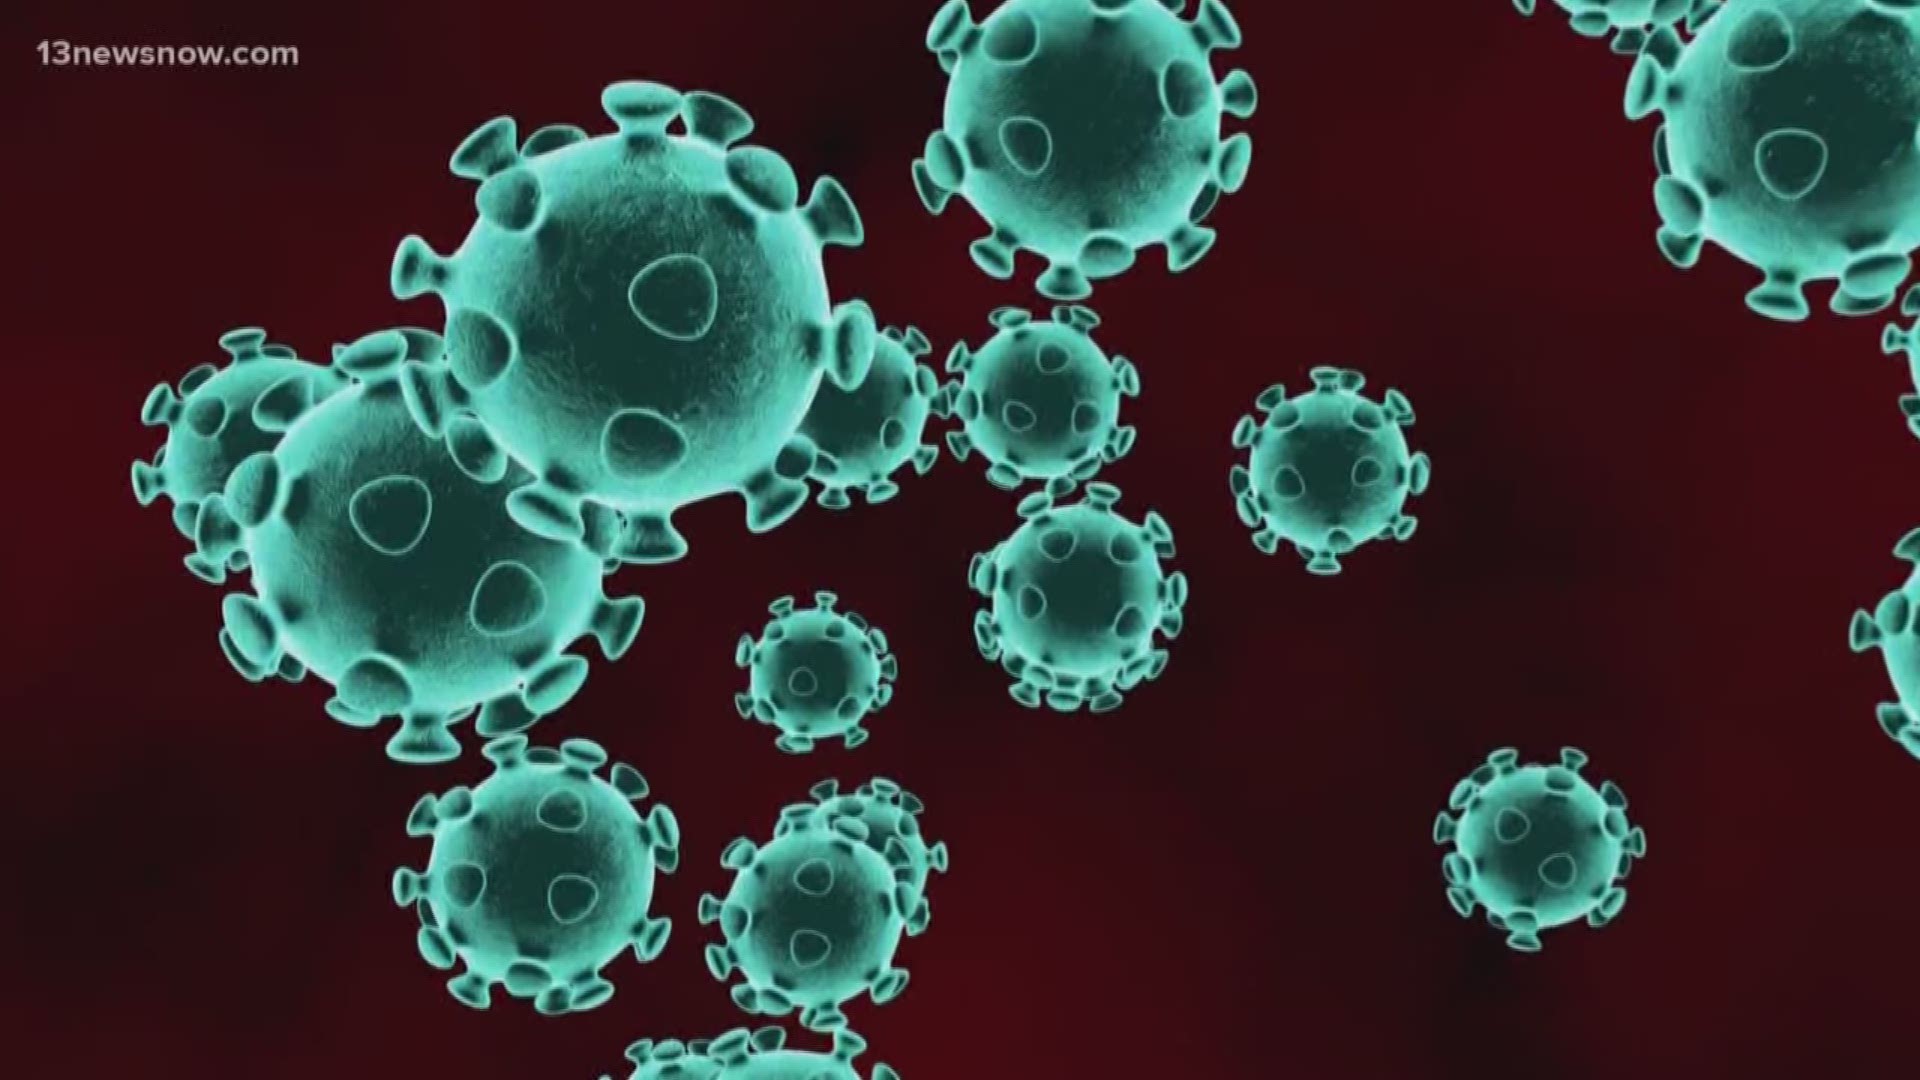 The Virginia Department of Health said another man who contracted the strain of coronavirus died.